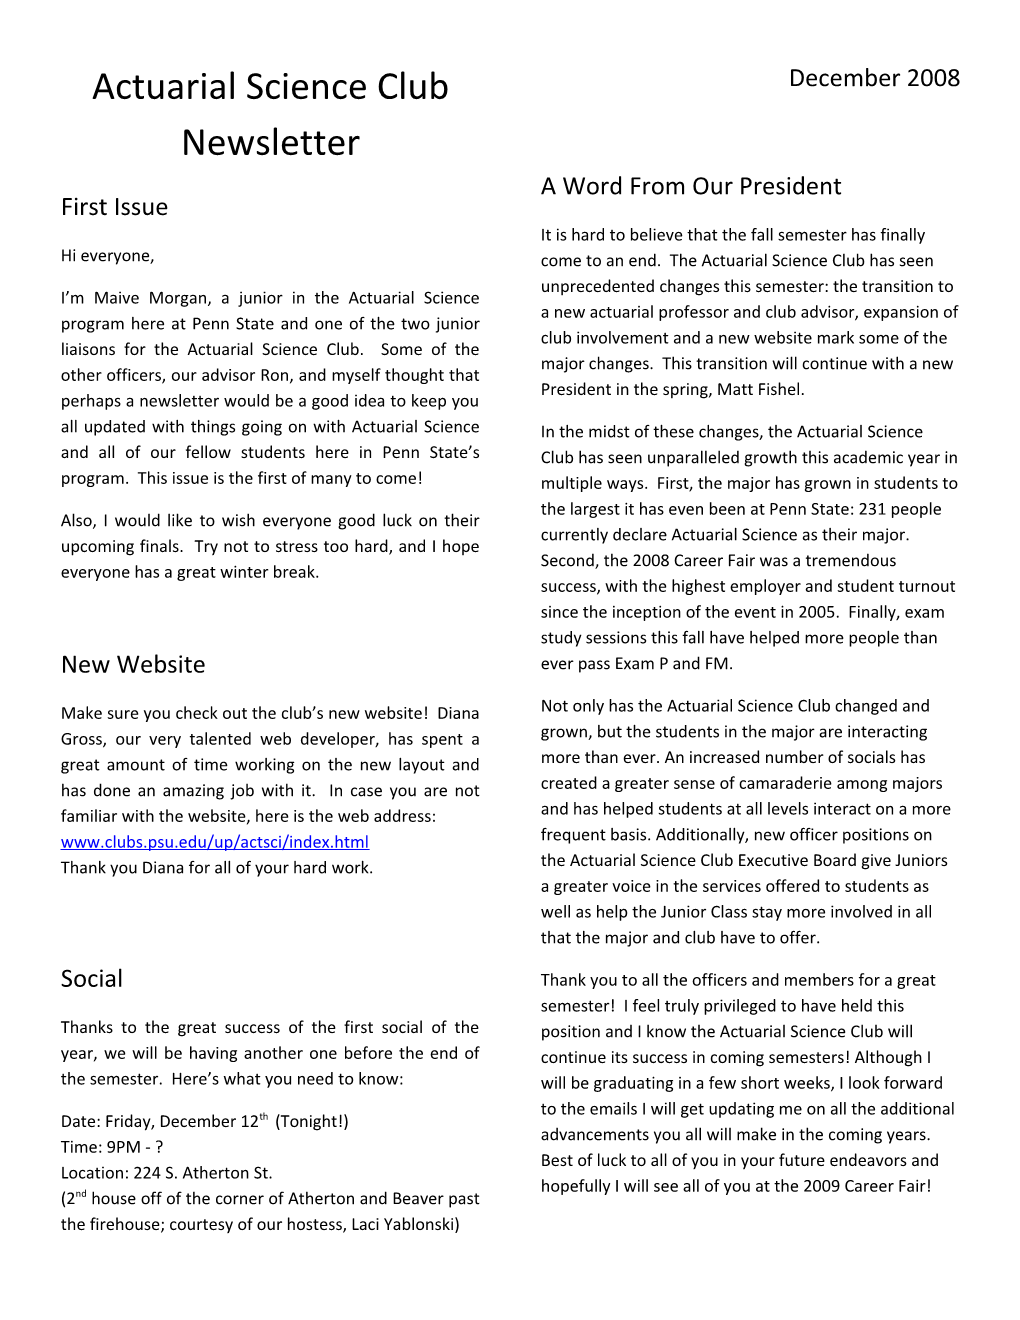 Actuarial Science Club Newsletter